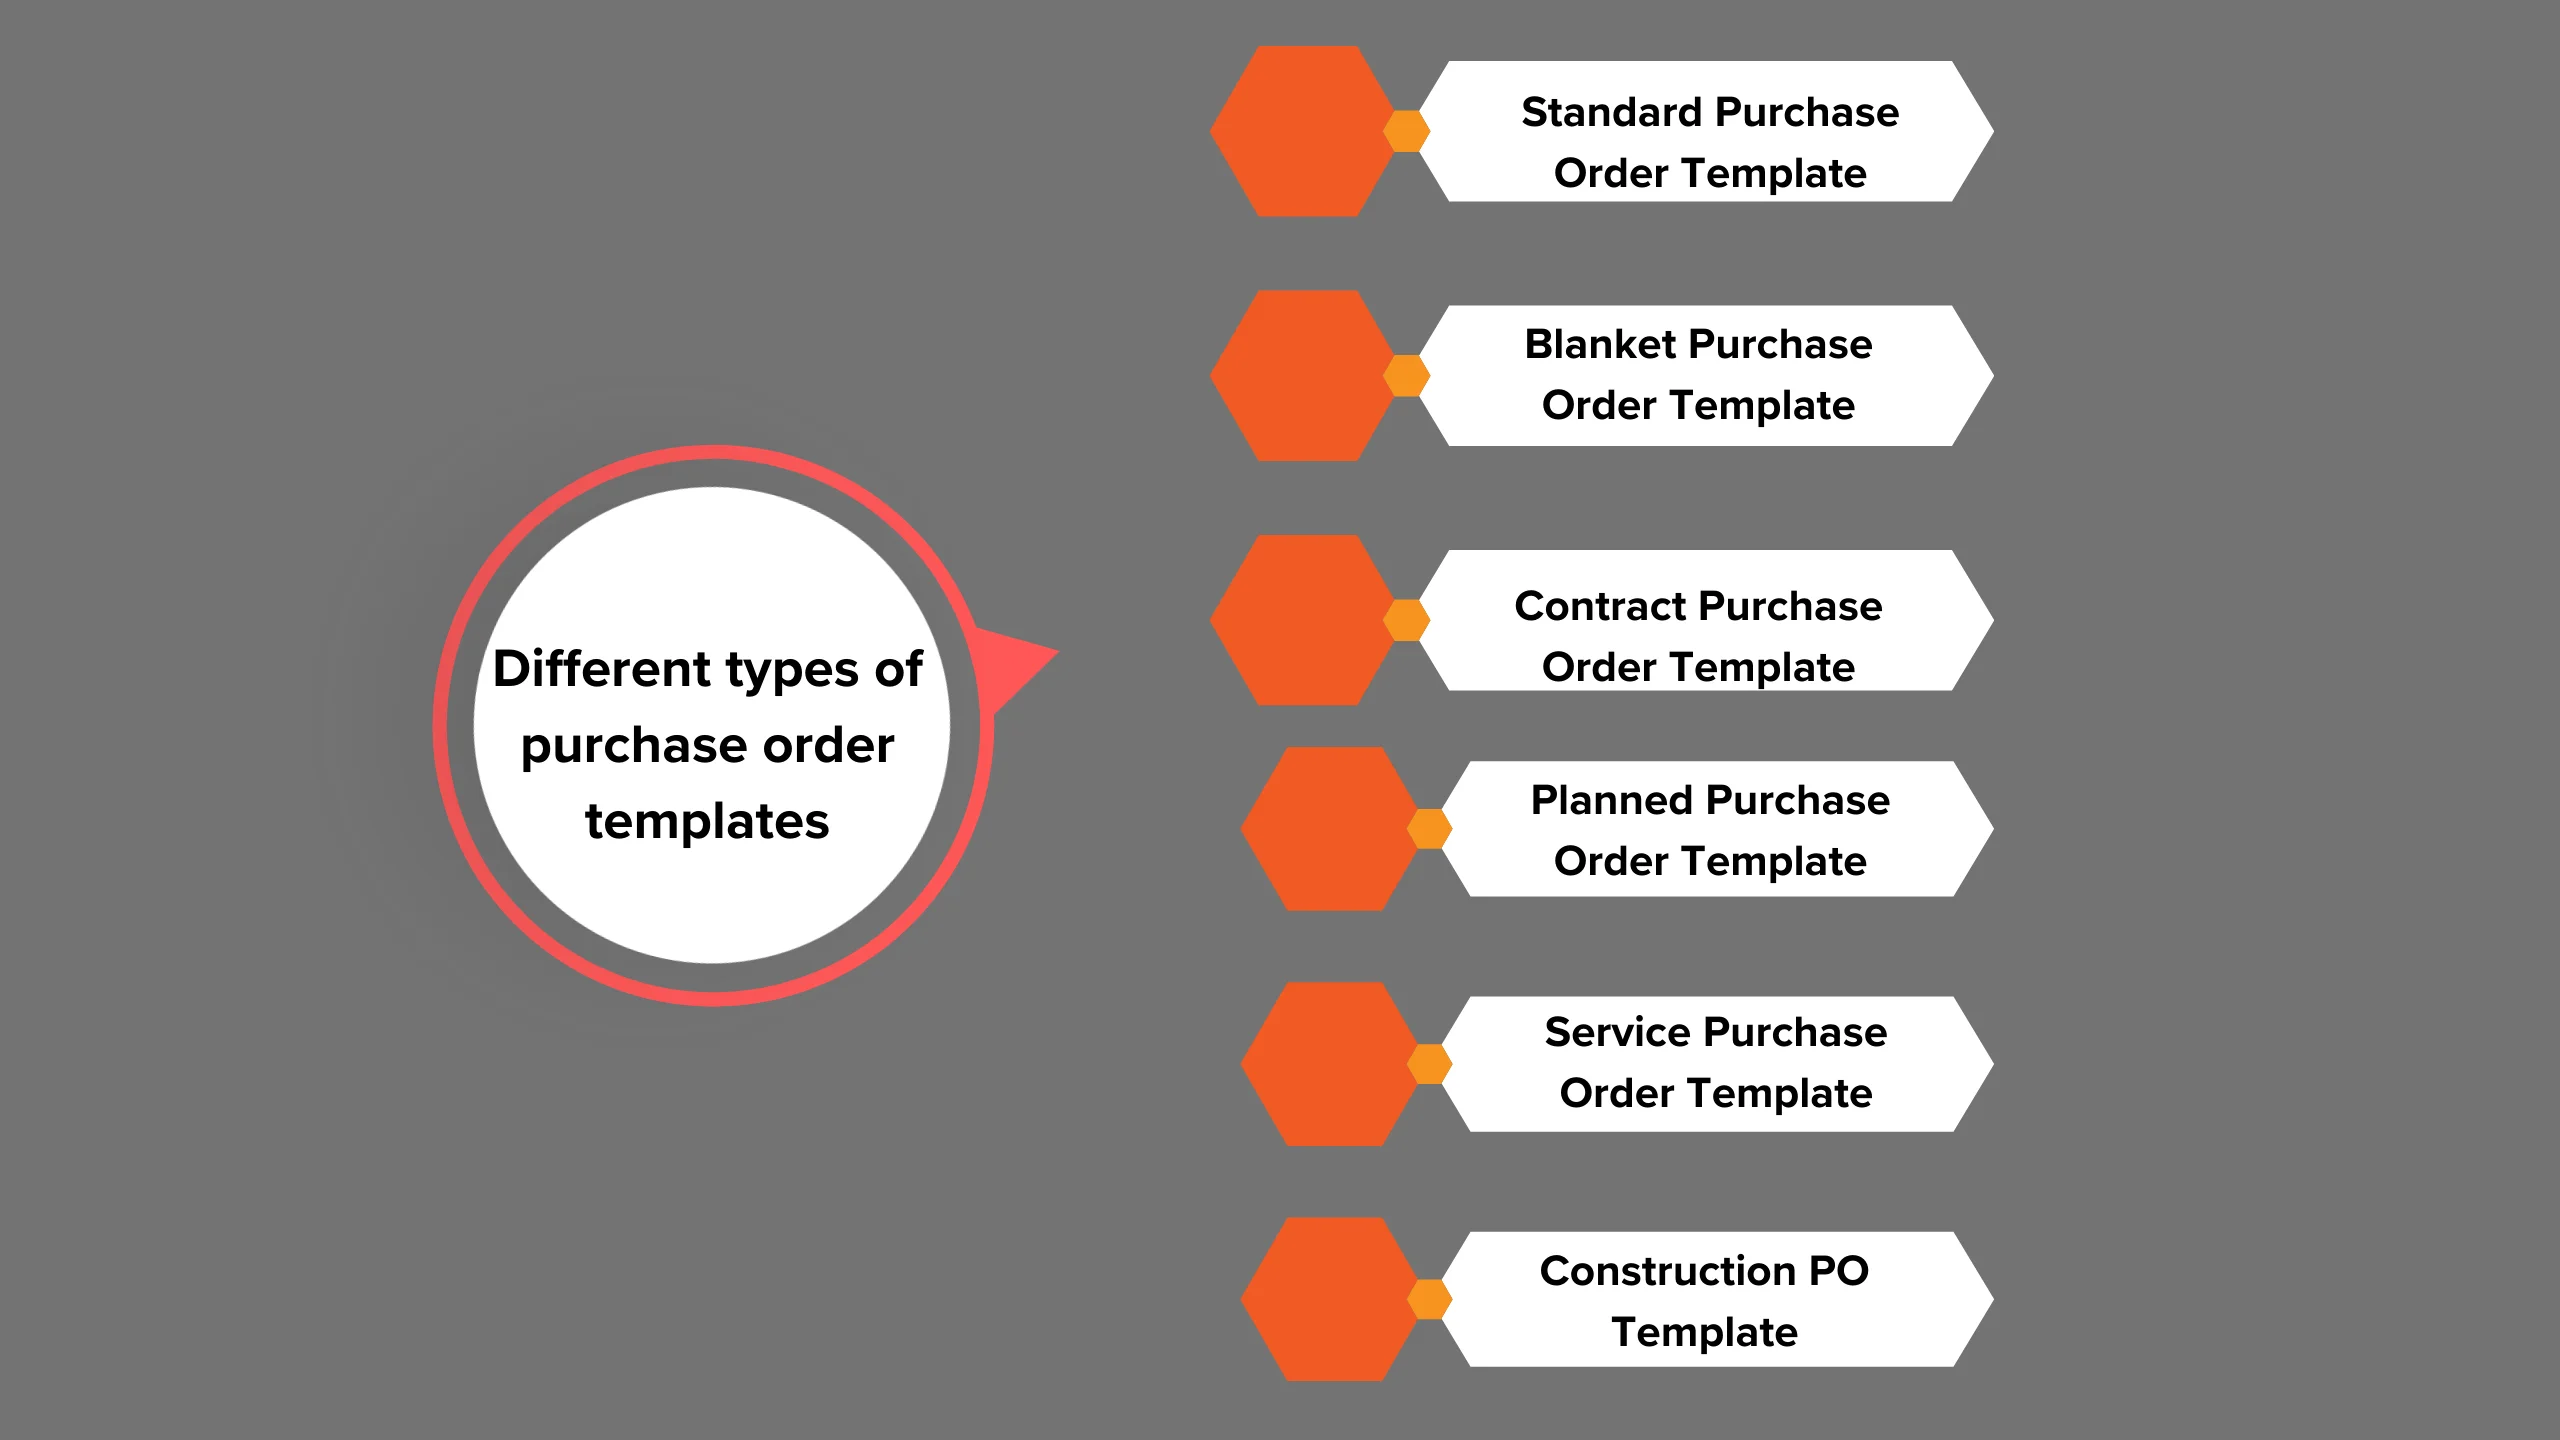 purchase order templates that businesses can use, depending on their specific needs and preferences.